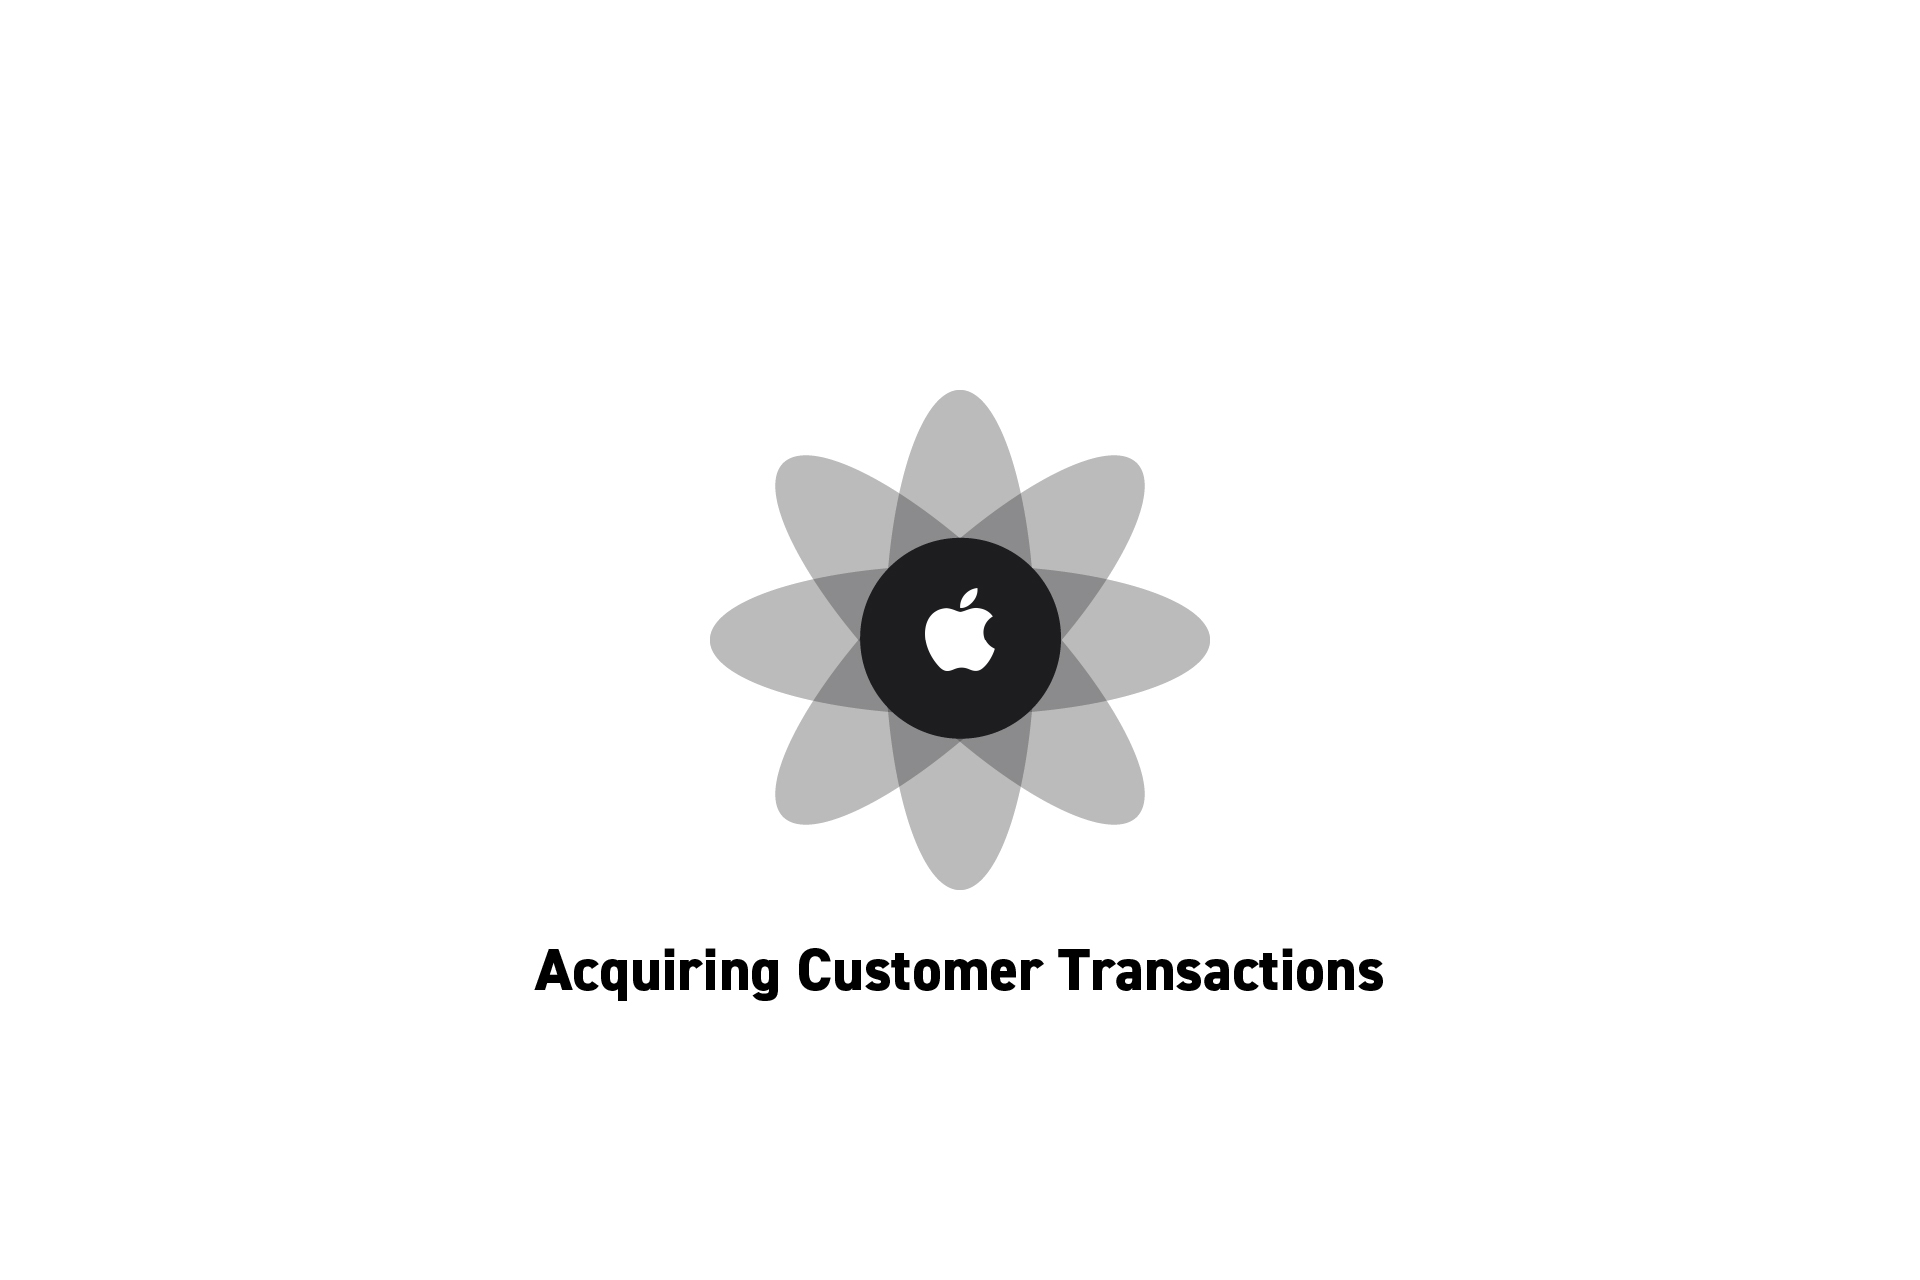 Acquiring Customer Transactions from the Apple App Store